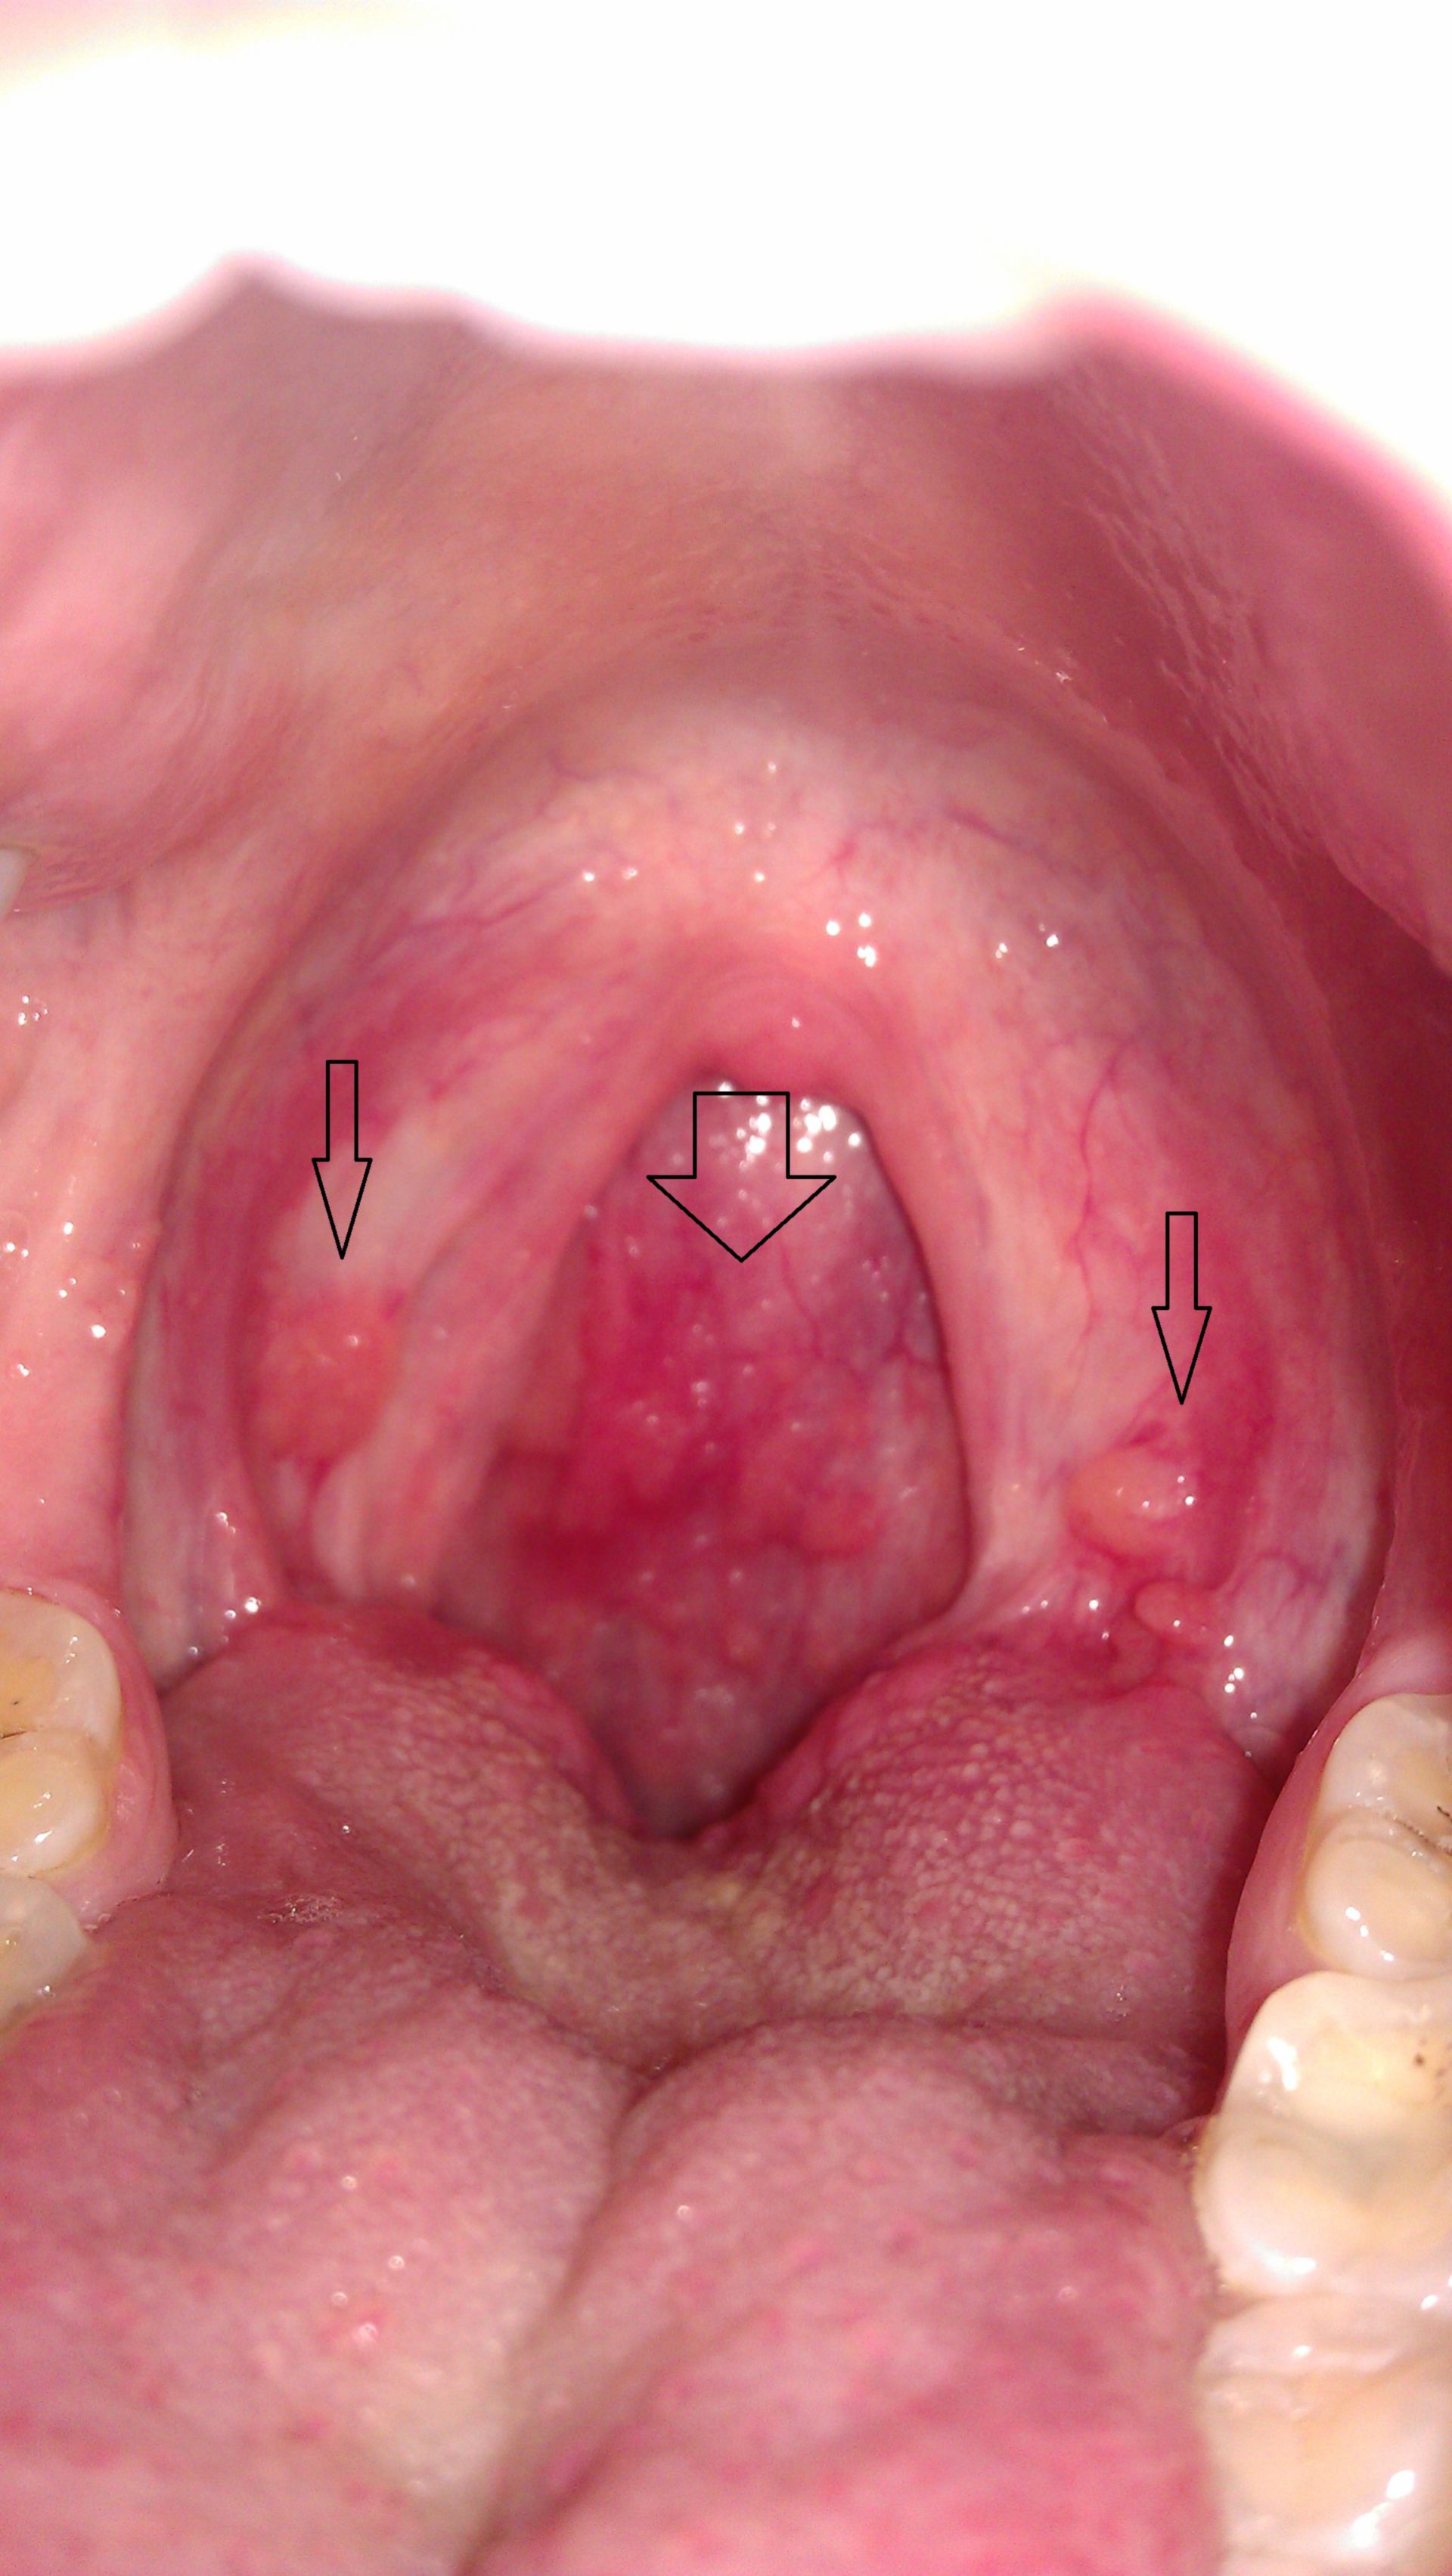 Reoccuring painful oral mucosa abnormality